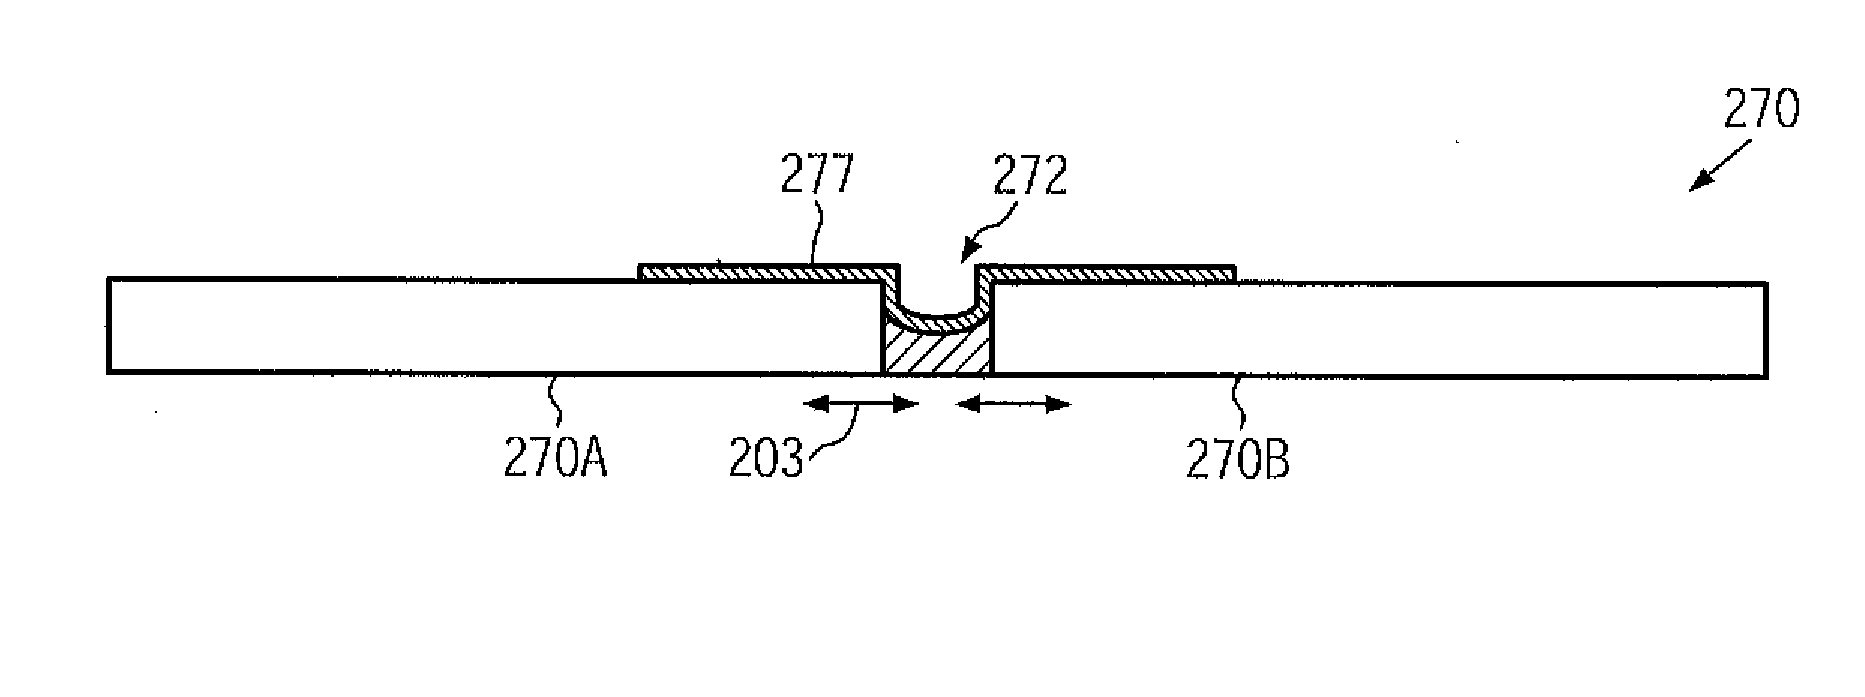 Chip package including multiple sections for reducing chip package interaction